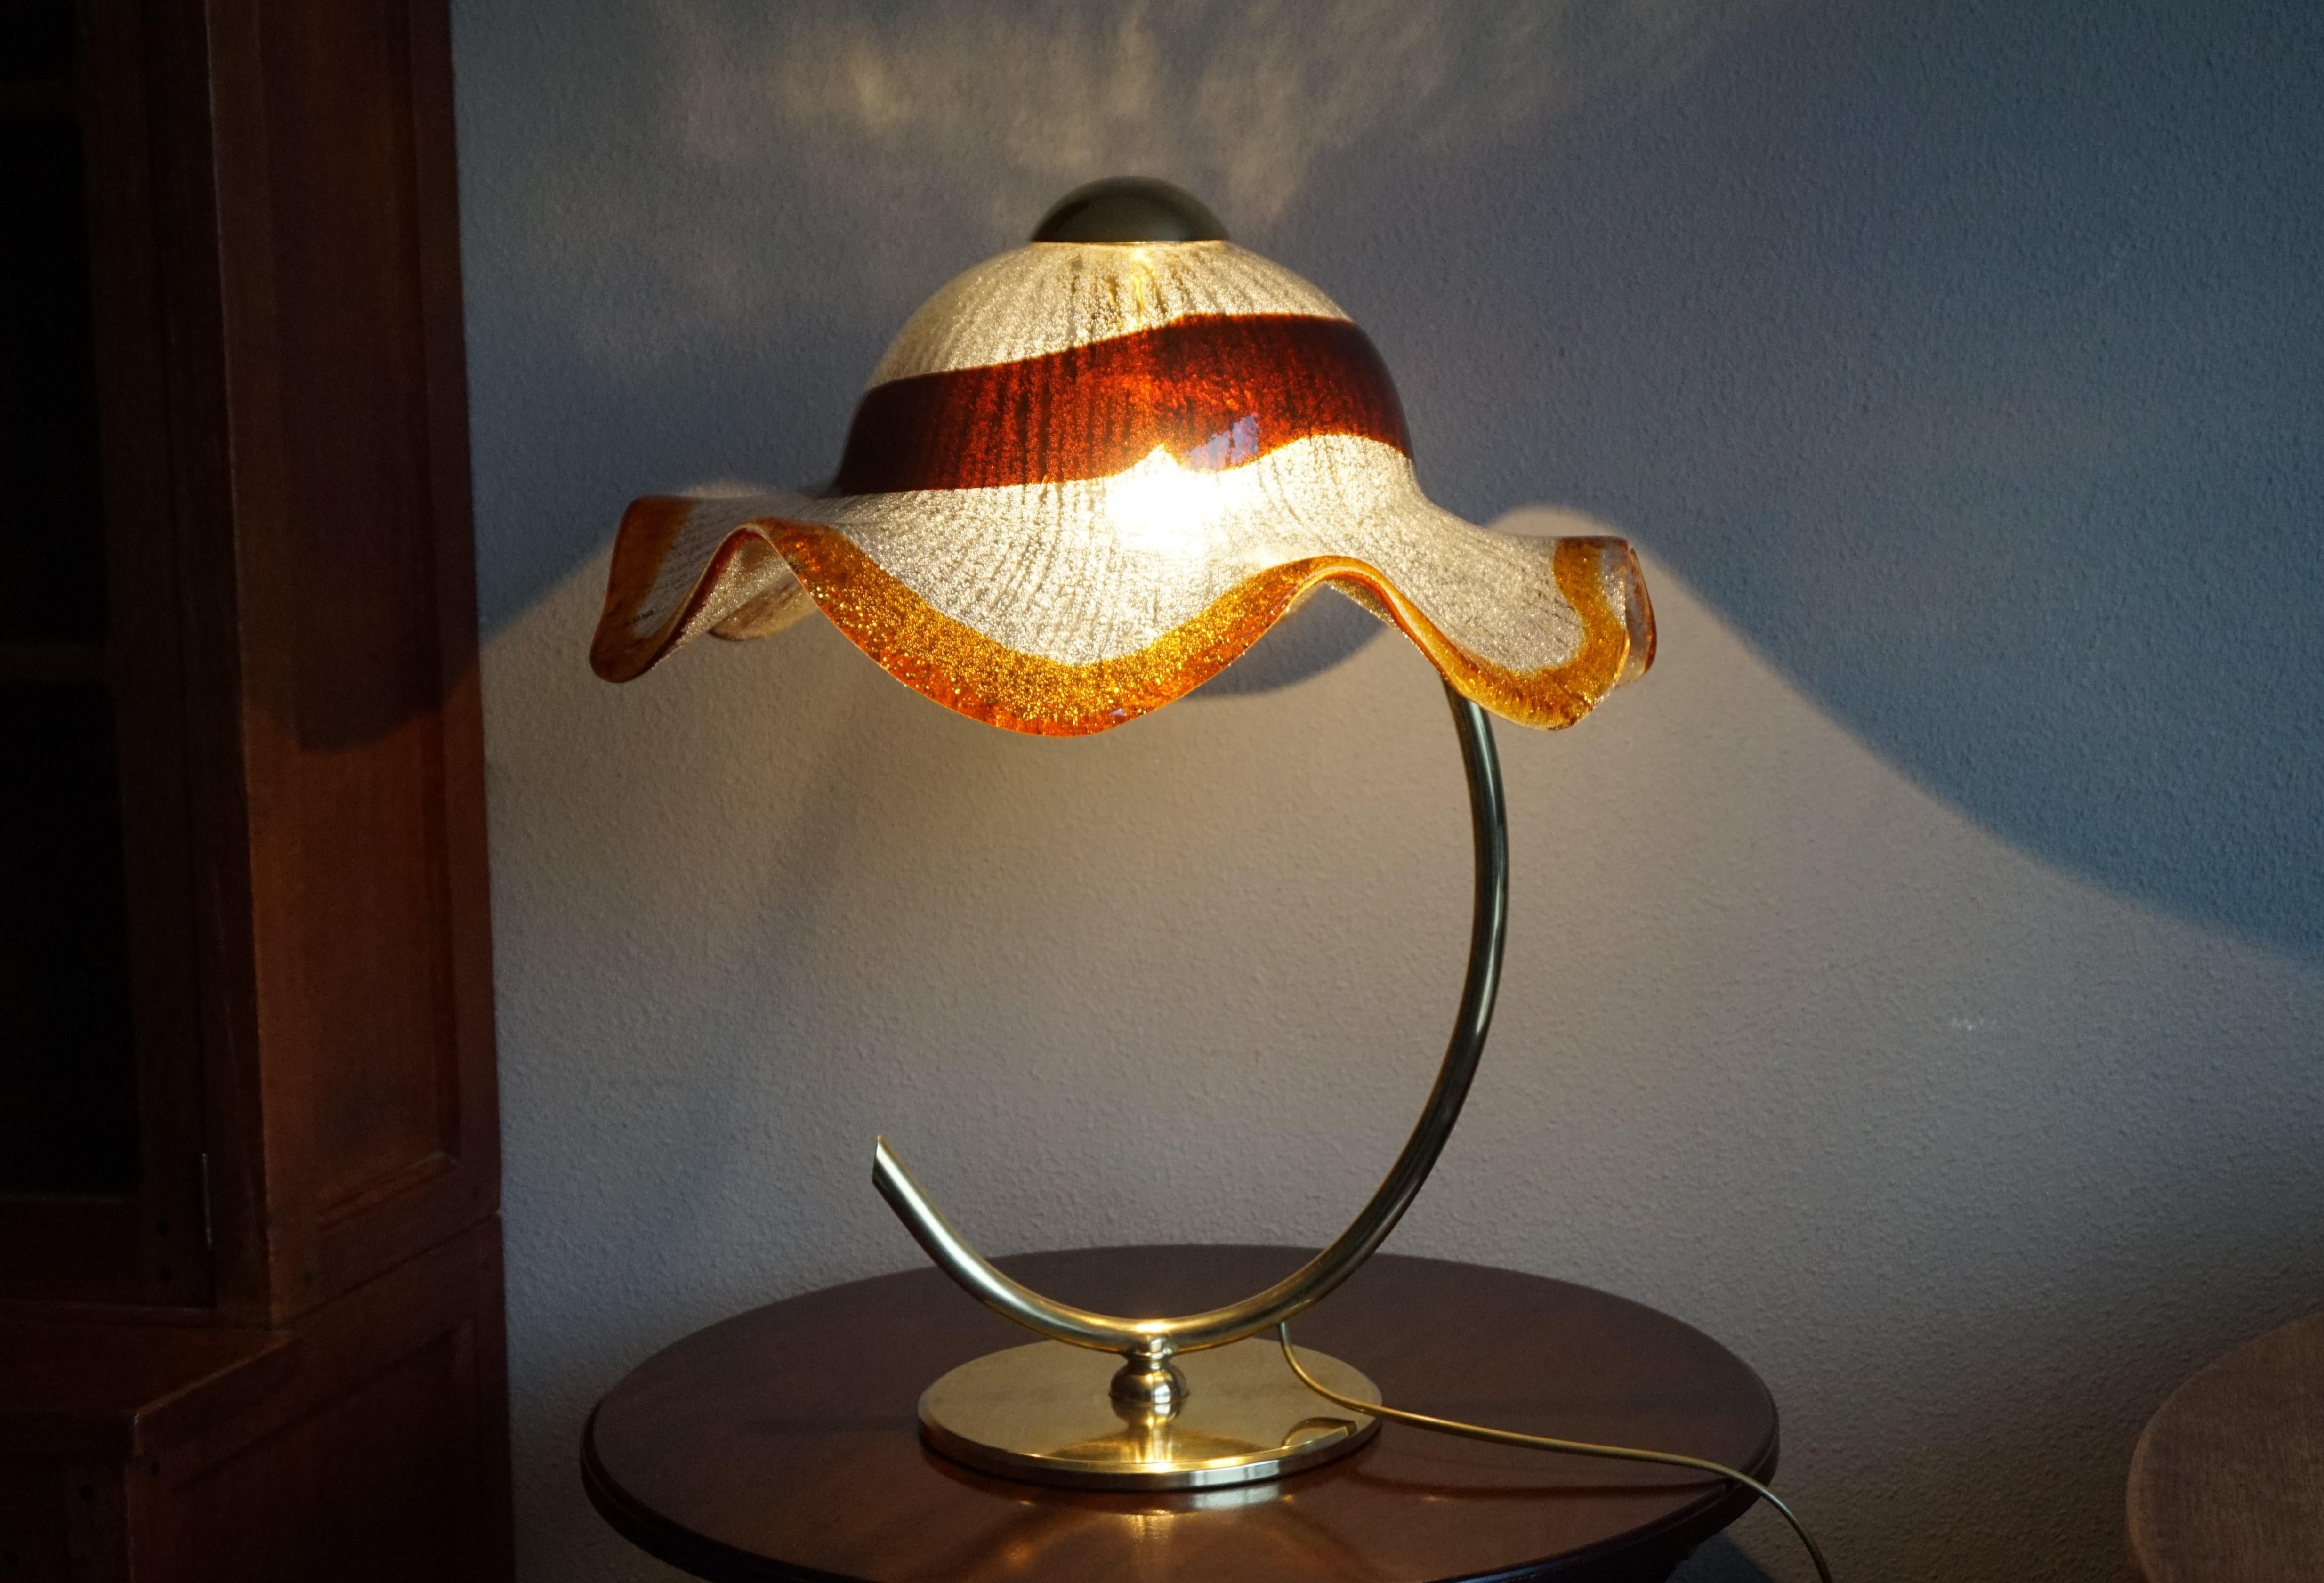 Italian art glass elegance combined with a very stylish brass base.

This rare and highly stylish table lamp from midcentury Italy is like a lady in an elegant summer hat. This Murano light fixture breathes nothing but class and great style and it